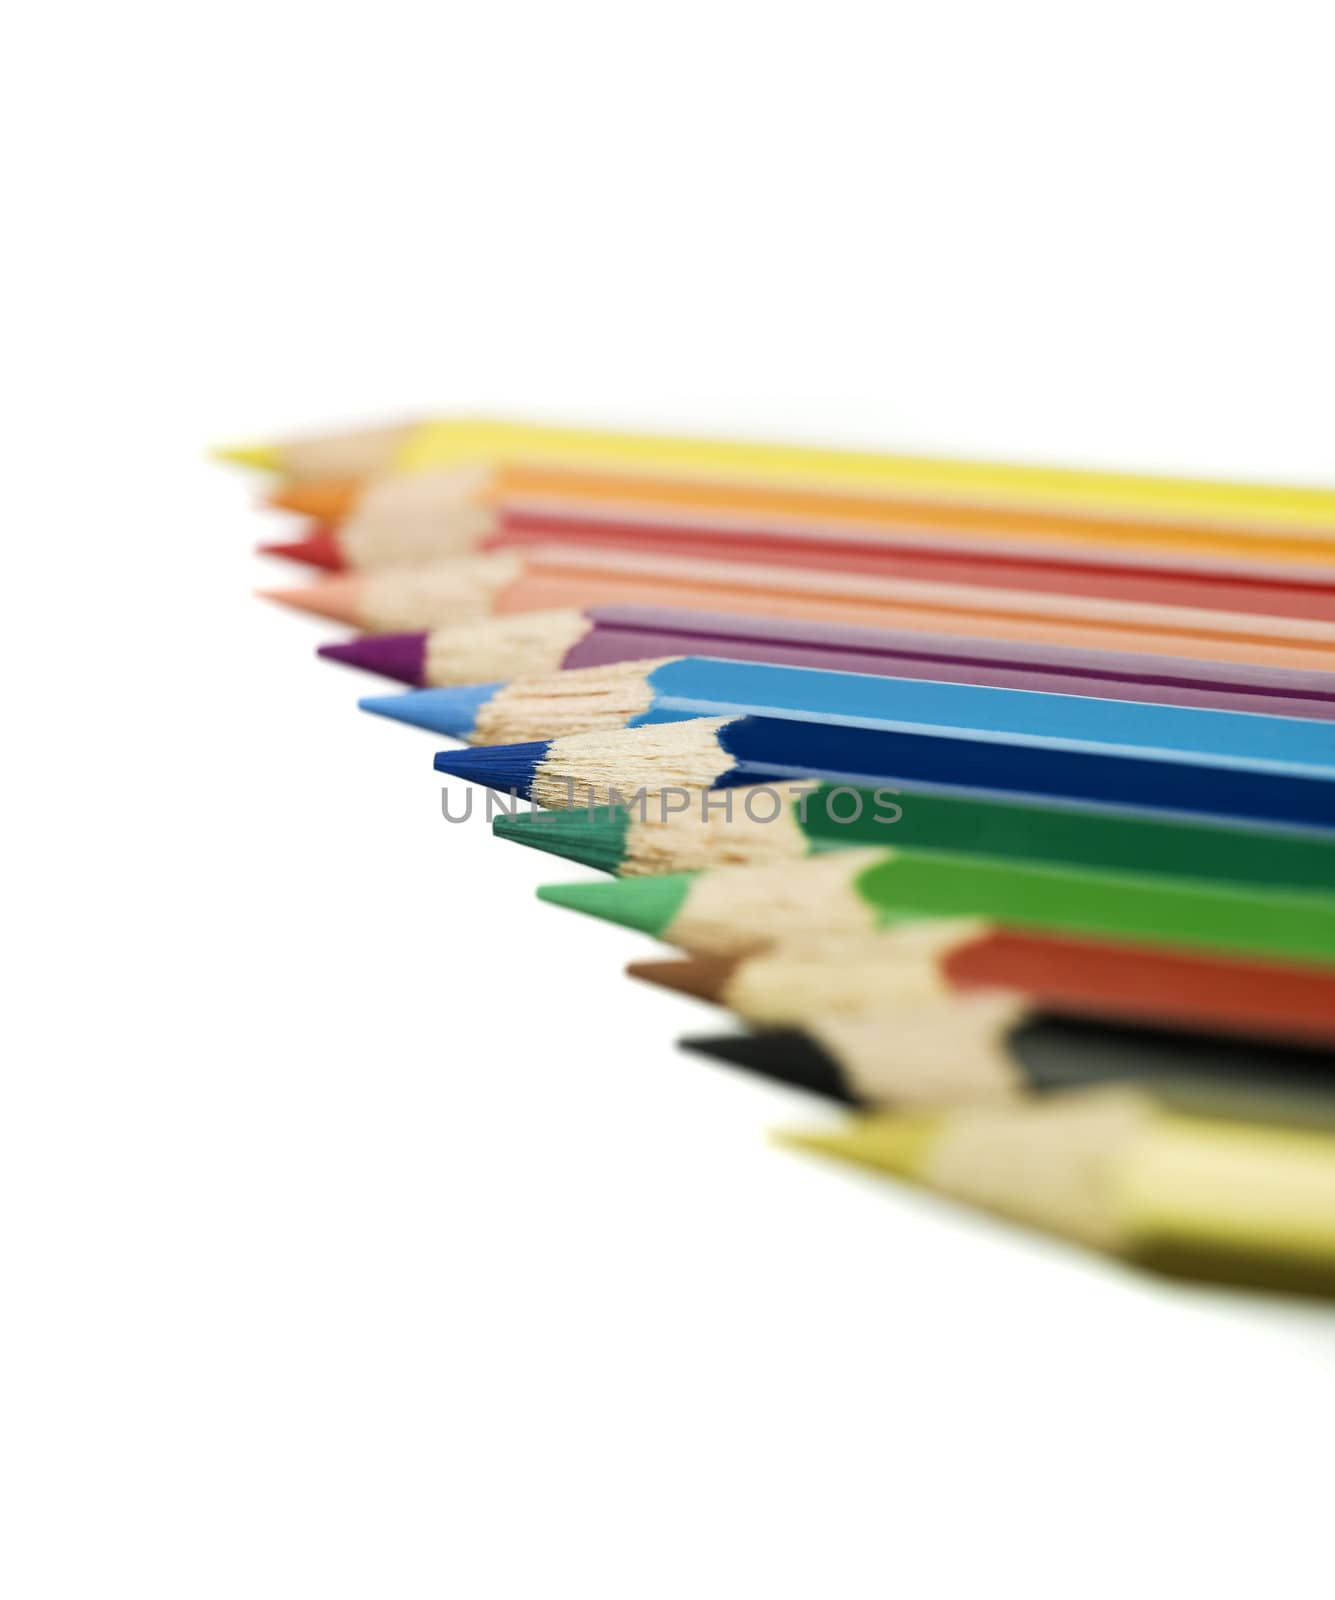 Row of colored pencils by gemenacom